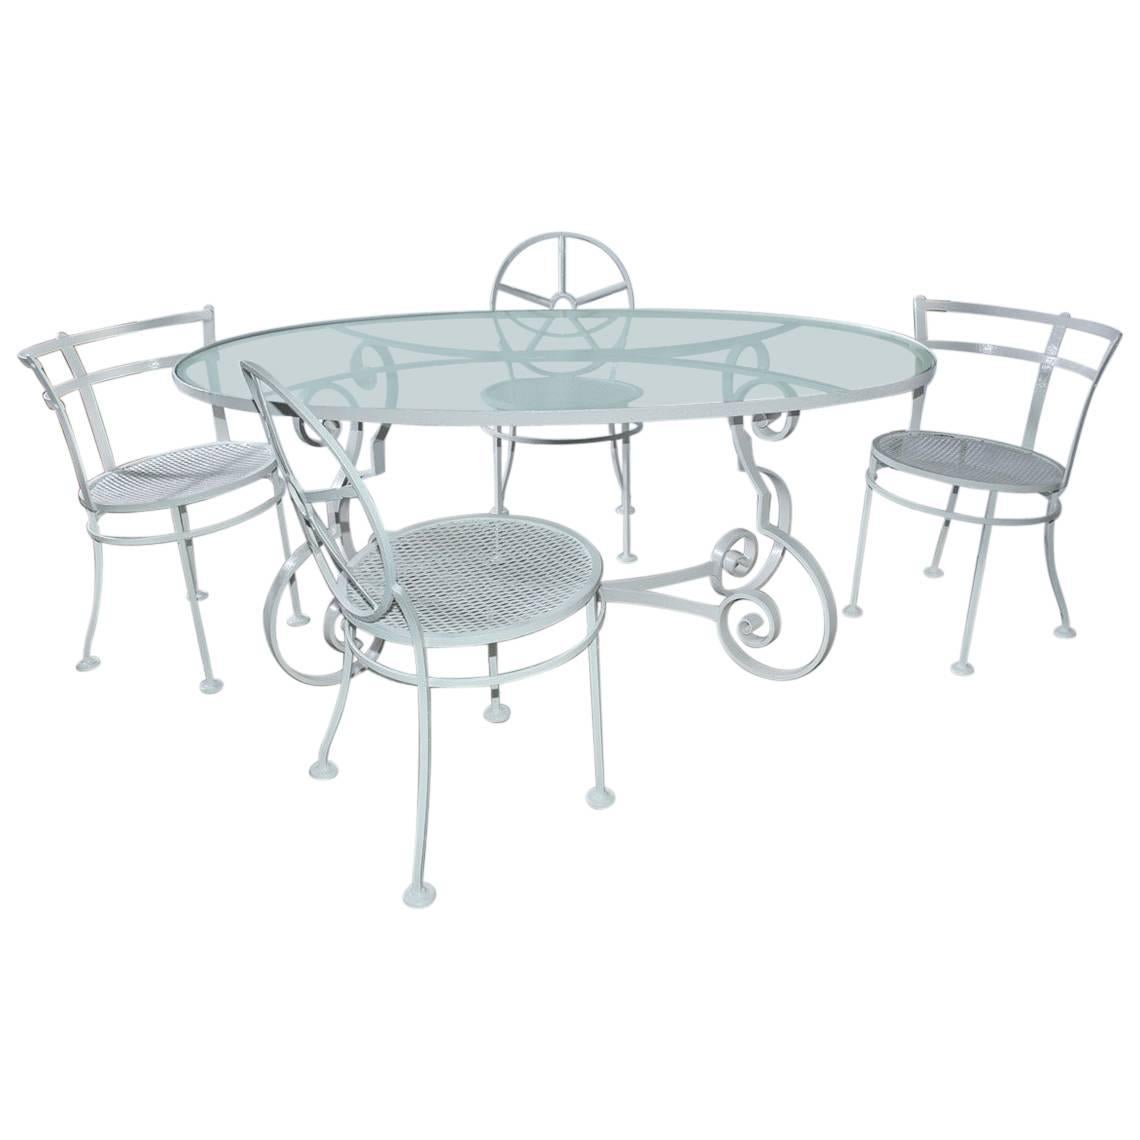 Oval Metal and Glass Midcentury Patio/Porch Garden Table and Four Dining Chairs